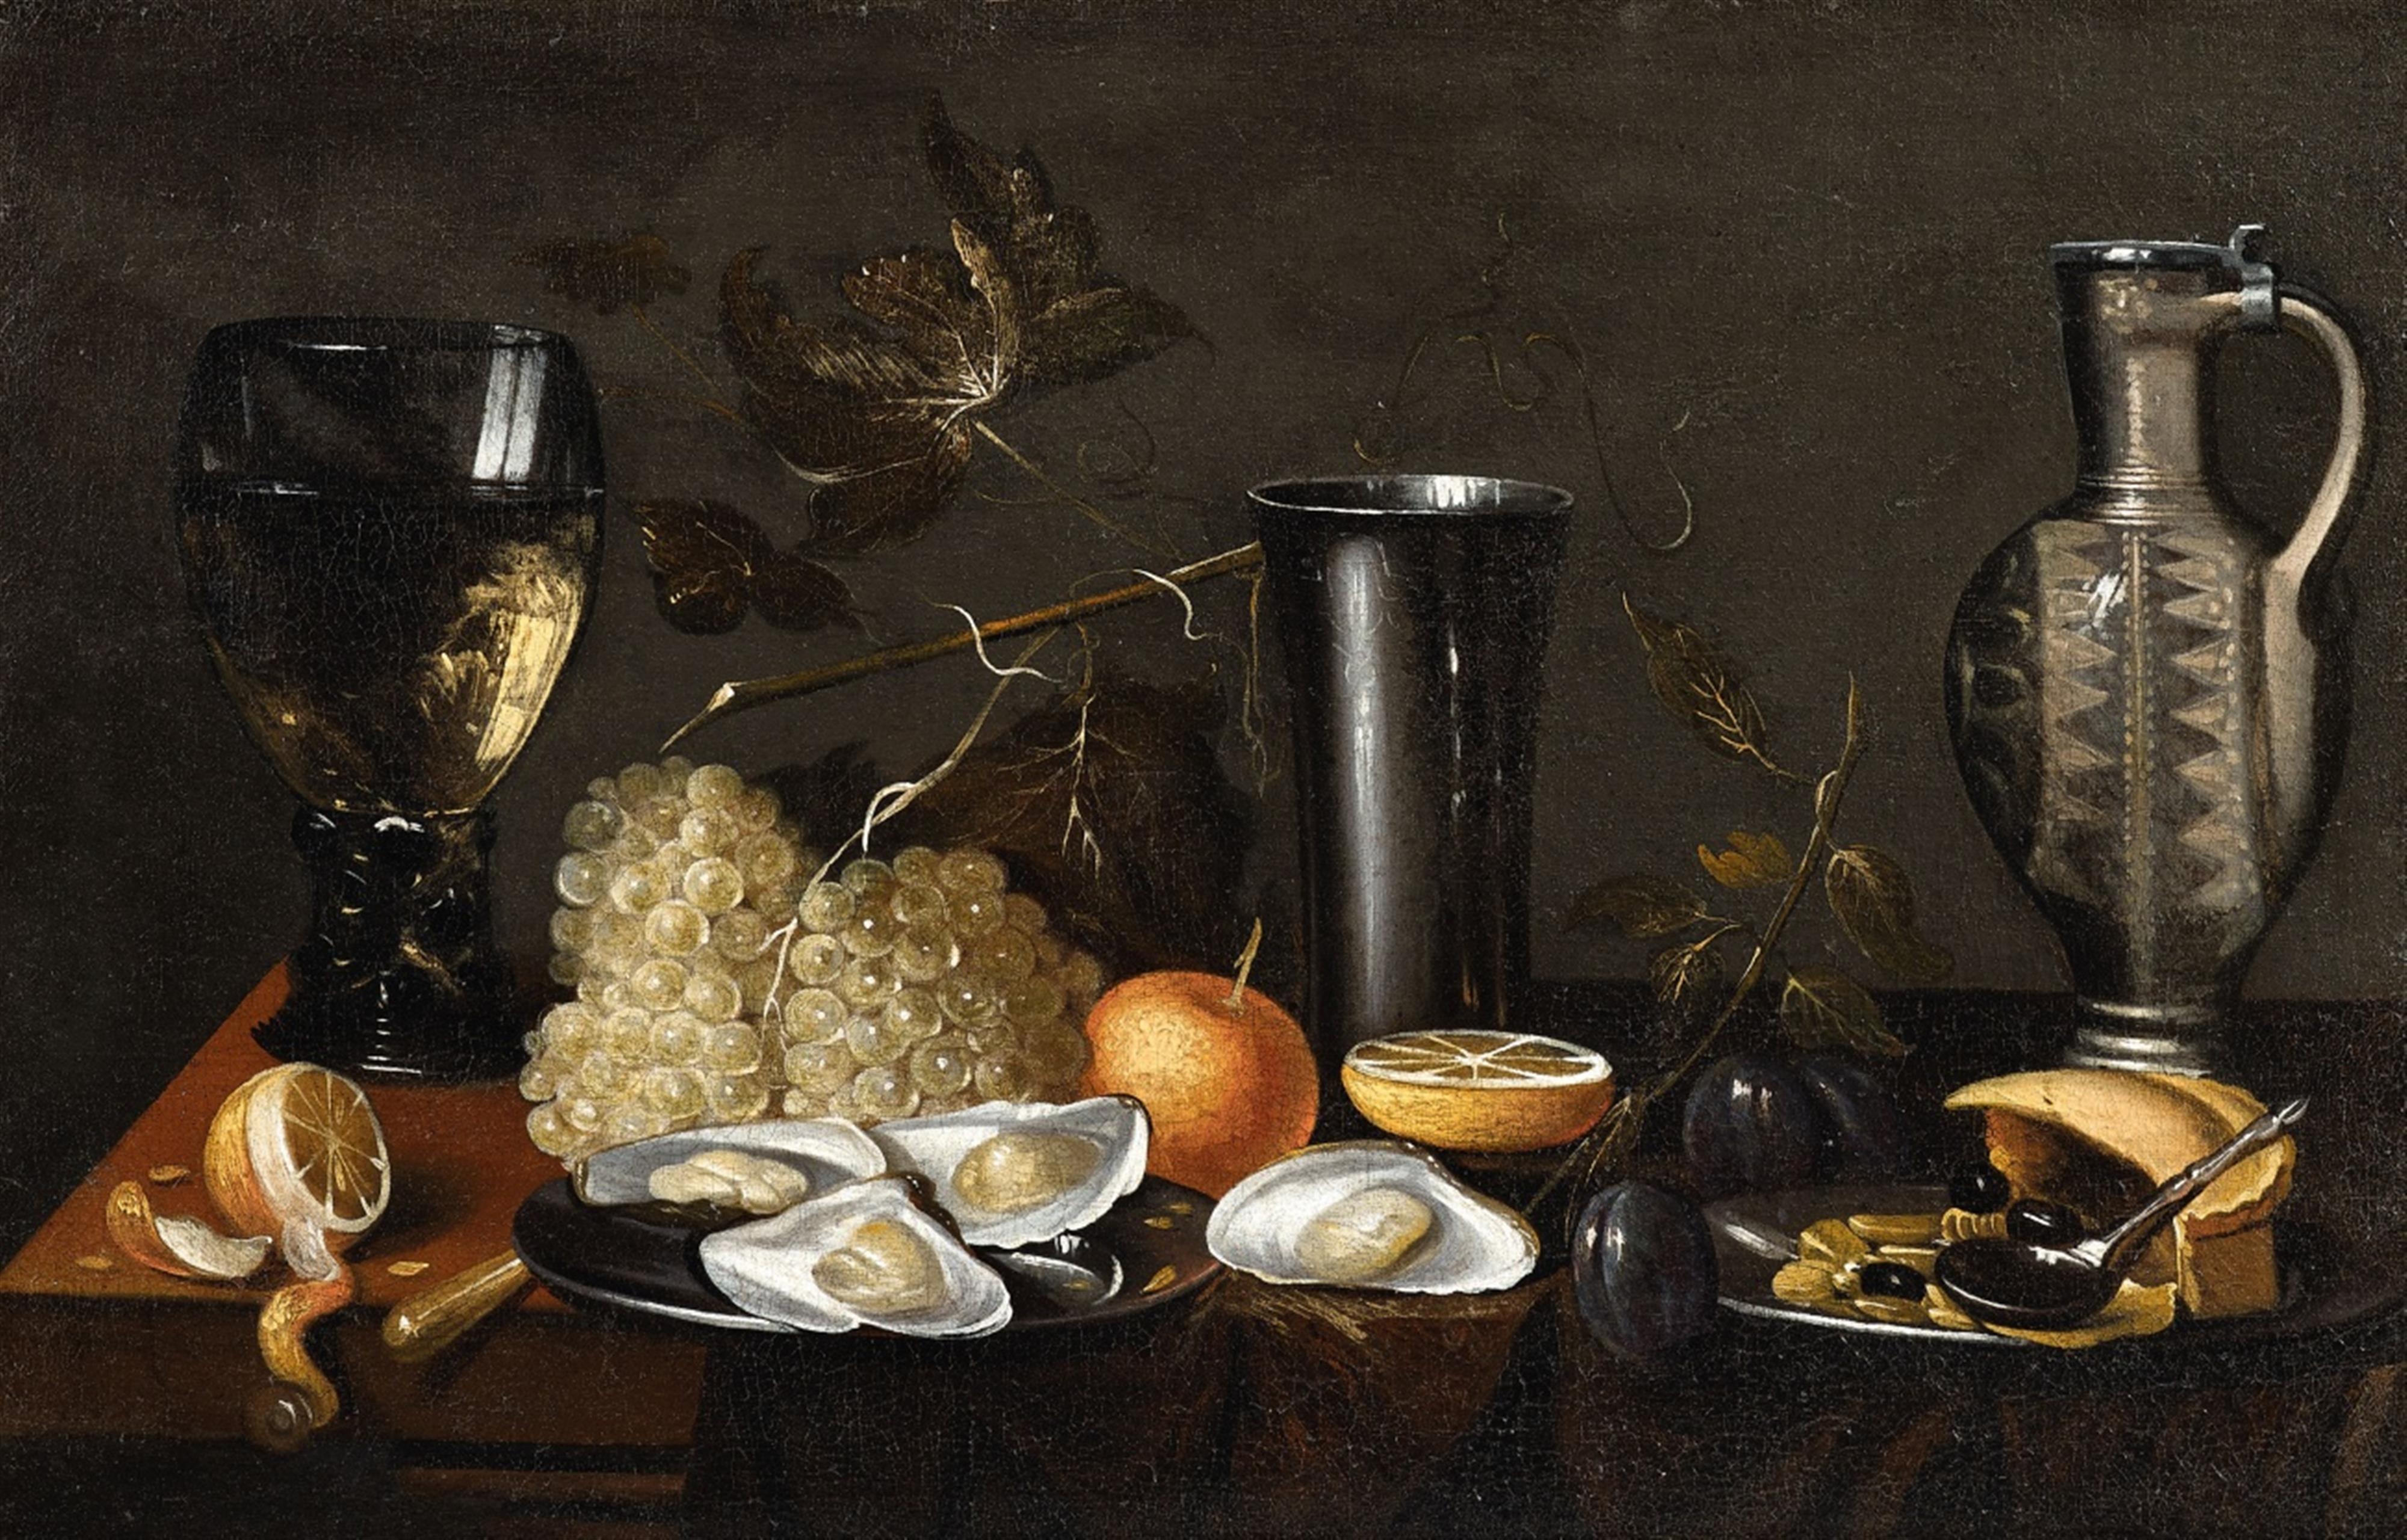 Netherlandish School 17th century - Still Life with a Rummer, Pitcher, Grapes, Lemon and Oysters - image-1